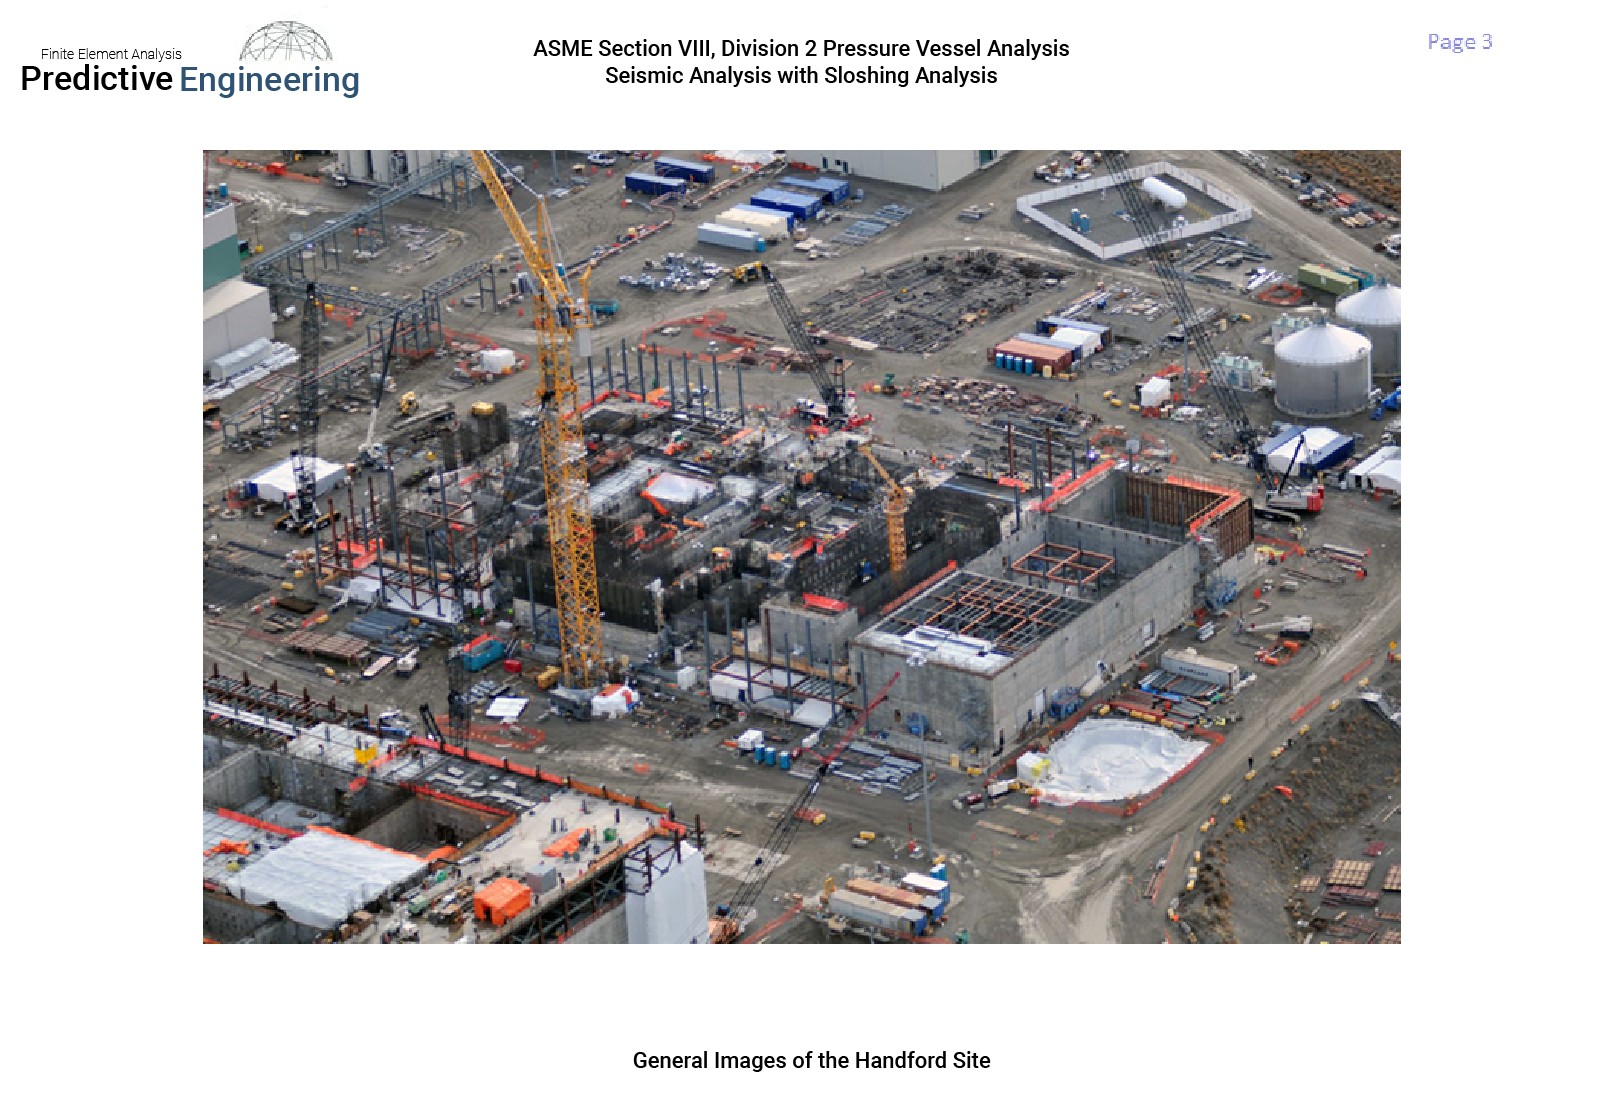 Overview of nuclear waste processing facility